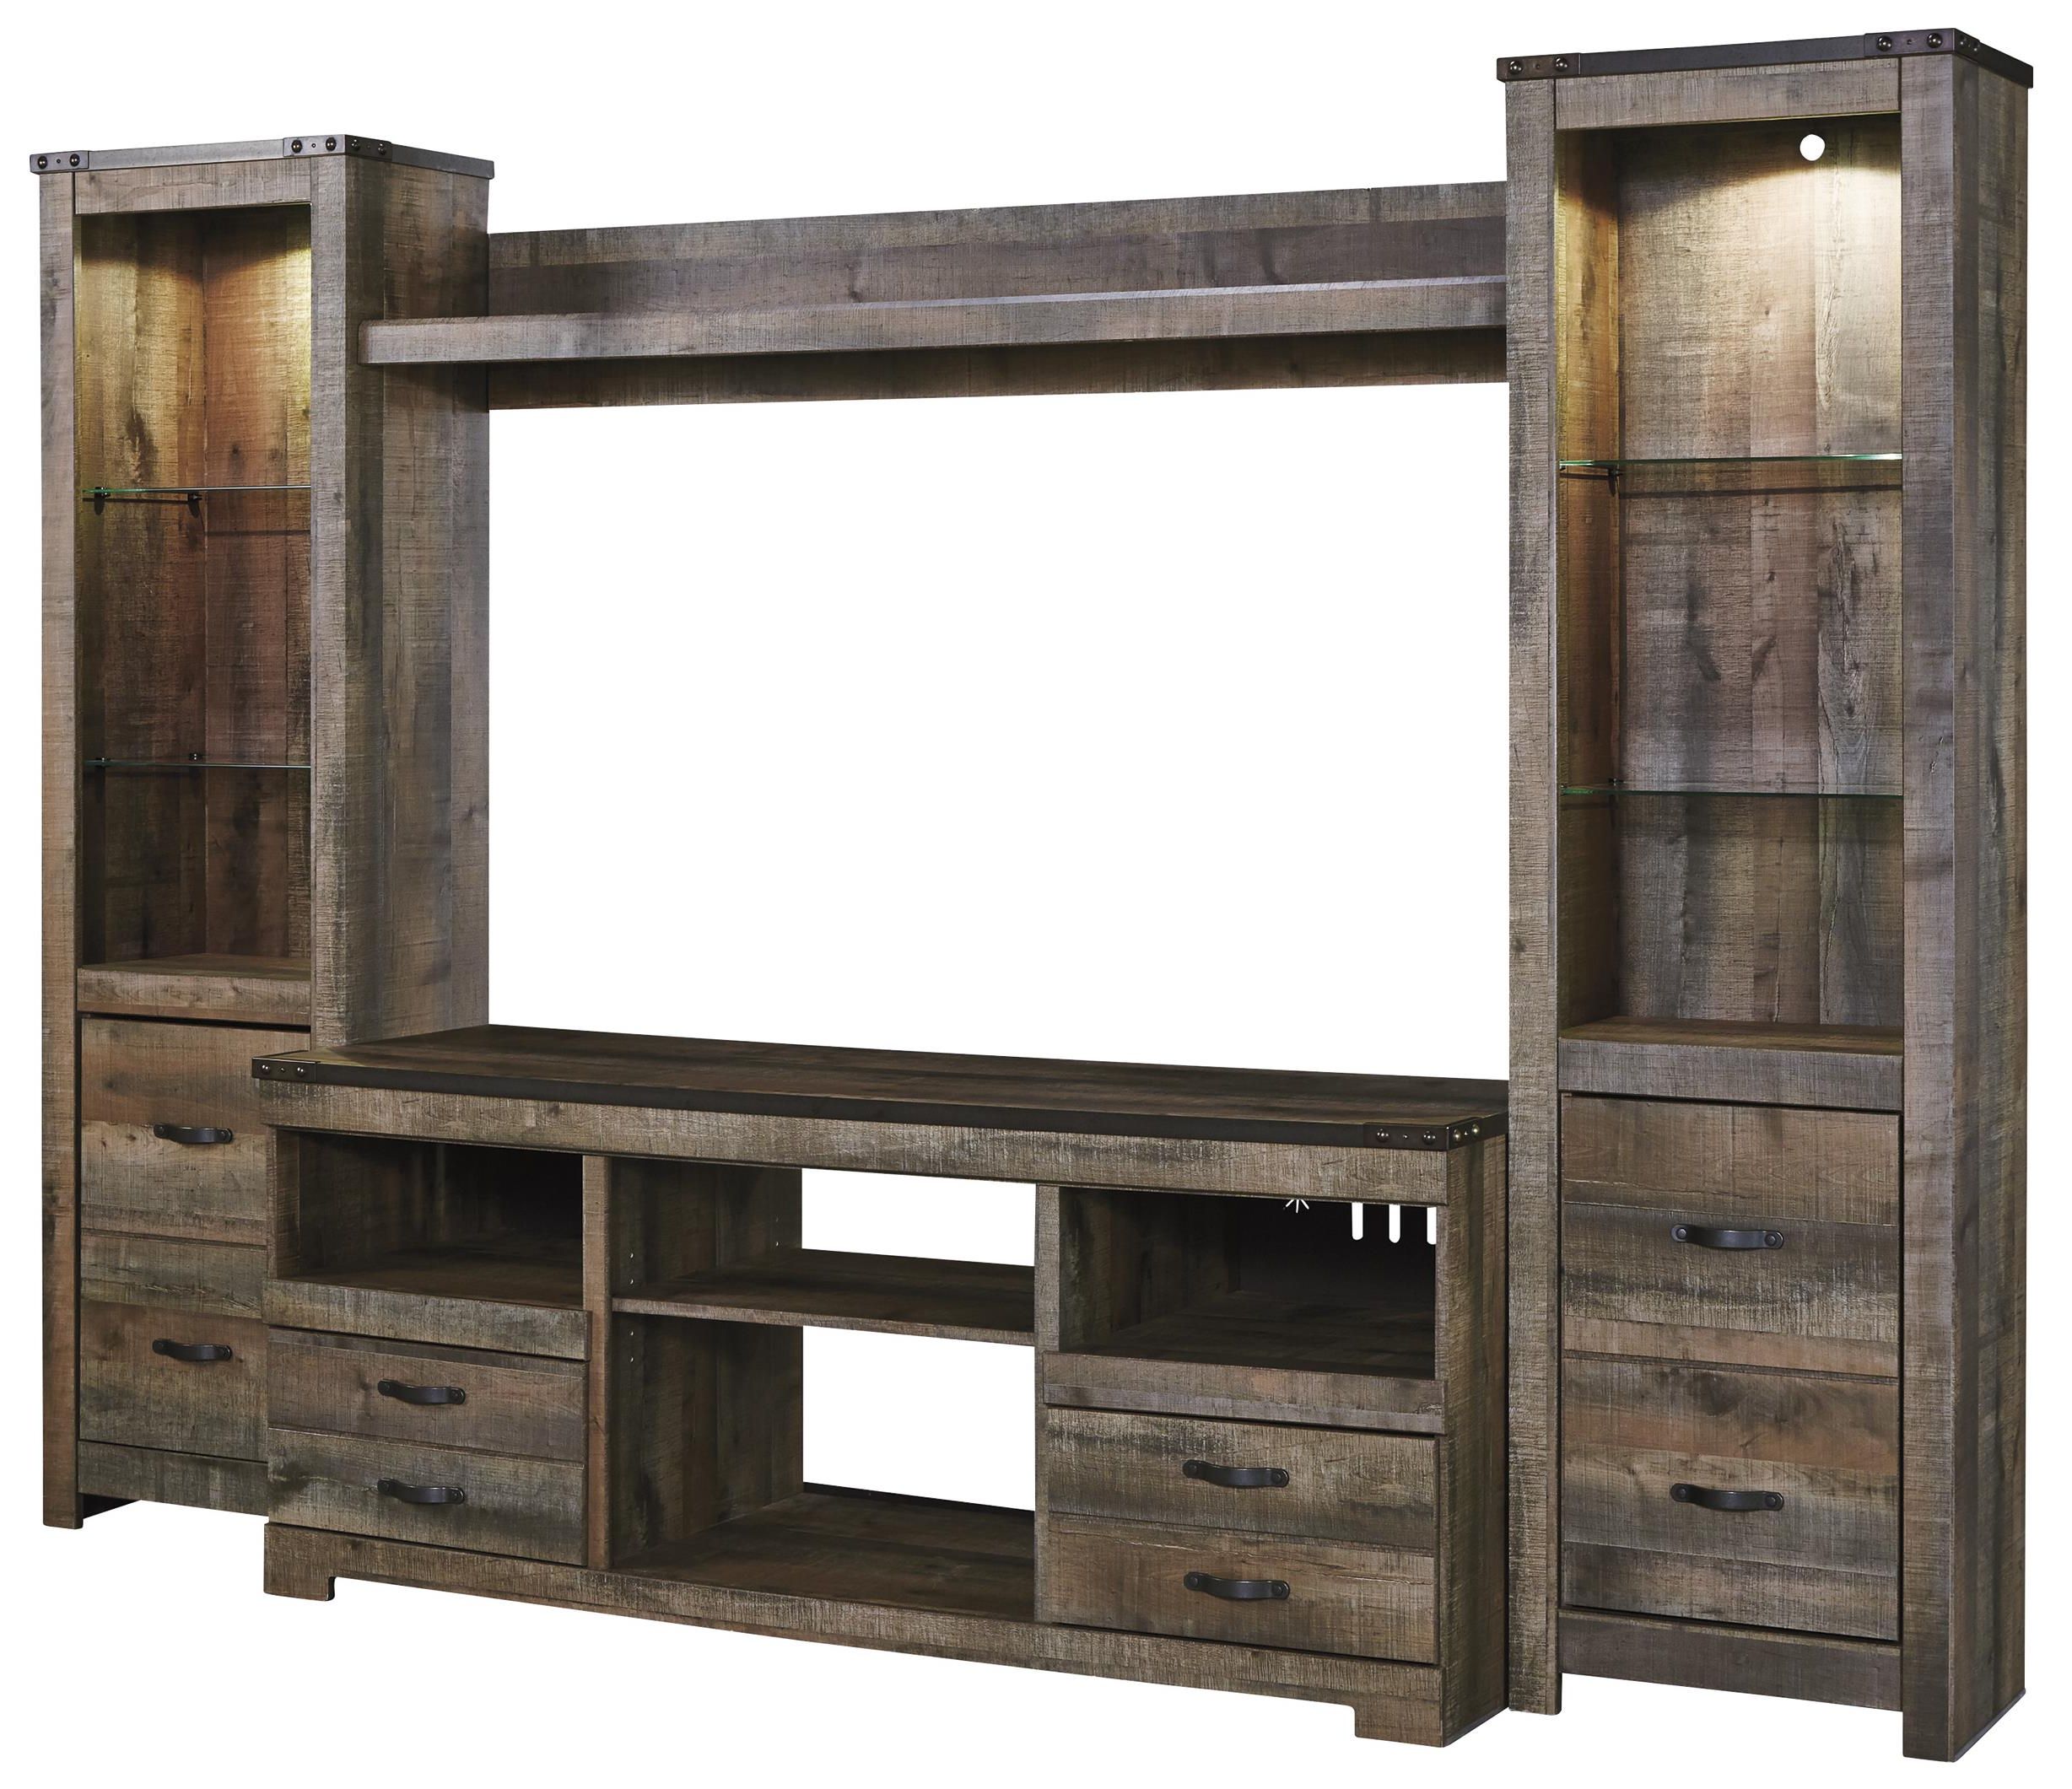 Recent Rustic Tv Cabinets Regarding Urban Rustic Rustic Large Tv Stand & 2 Tall Piers W/ Bridge (View 4 of 20)